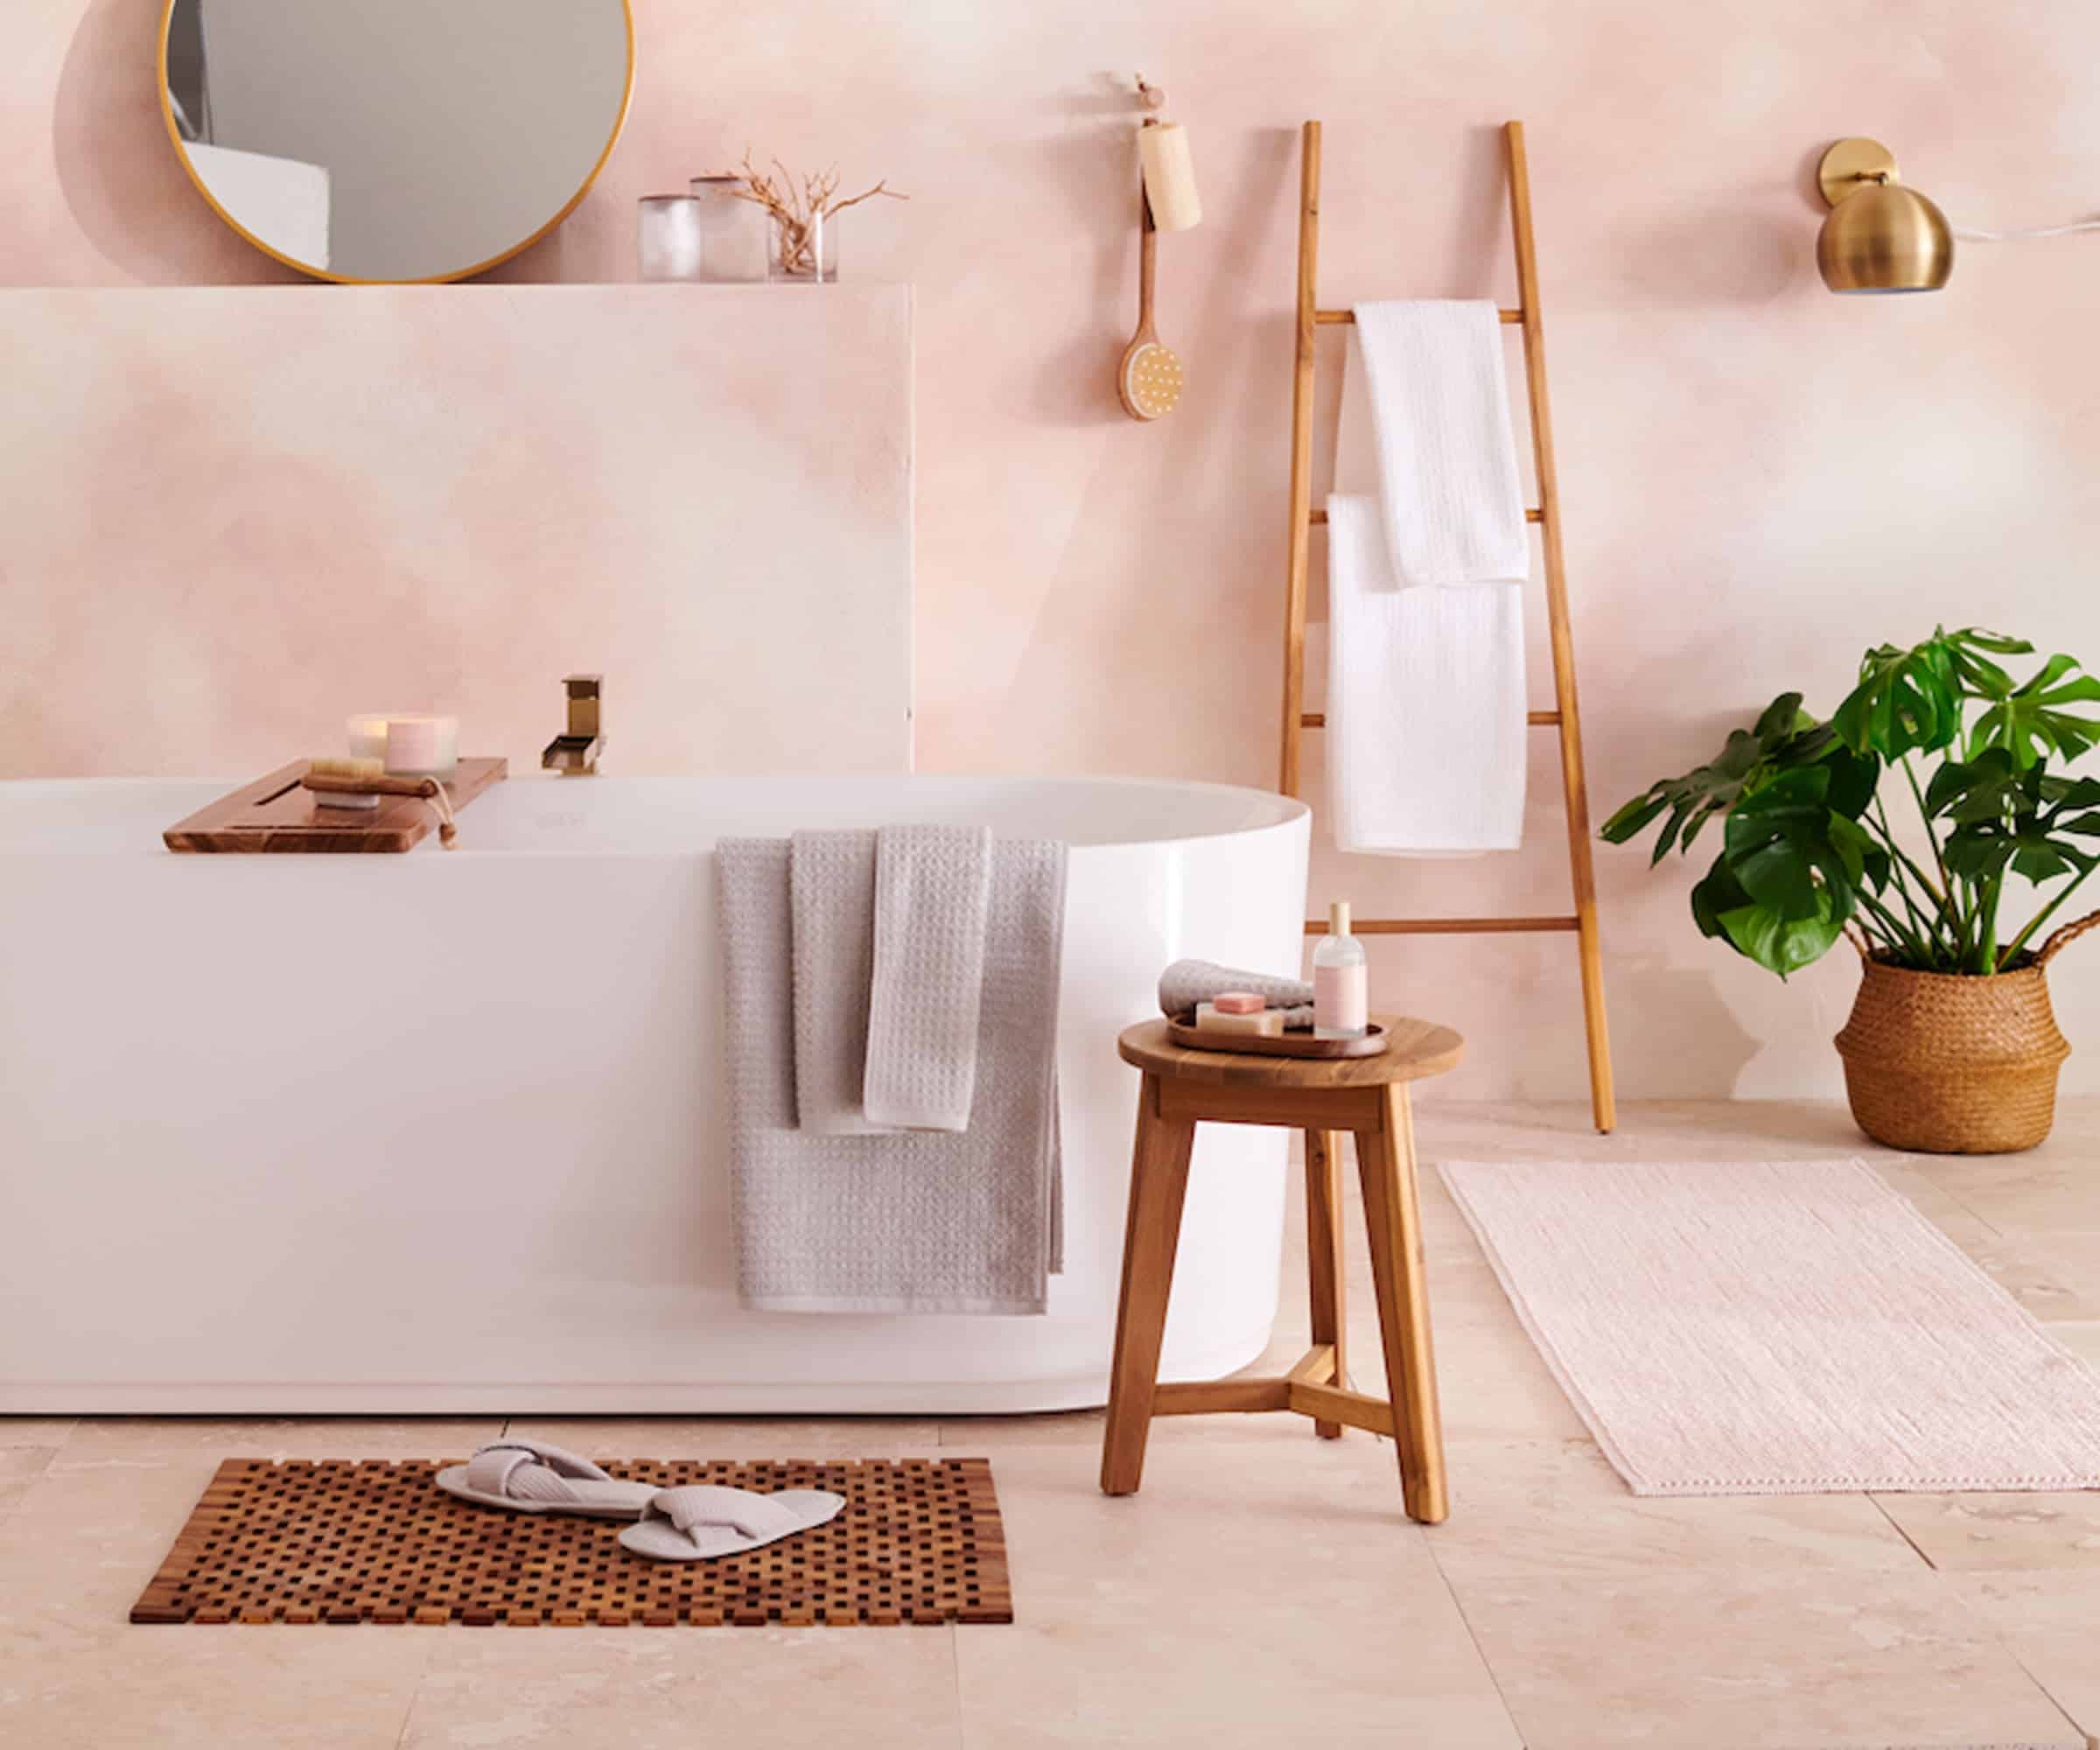 inexpensive changes to transform the bathroom 5